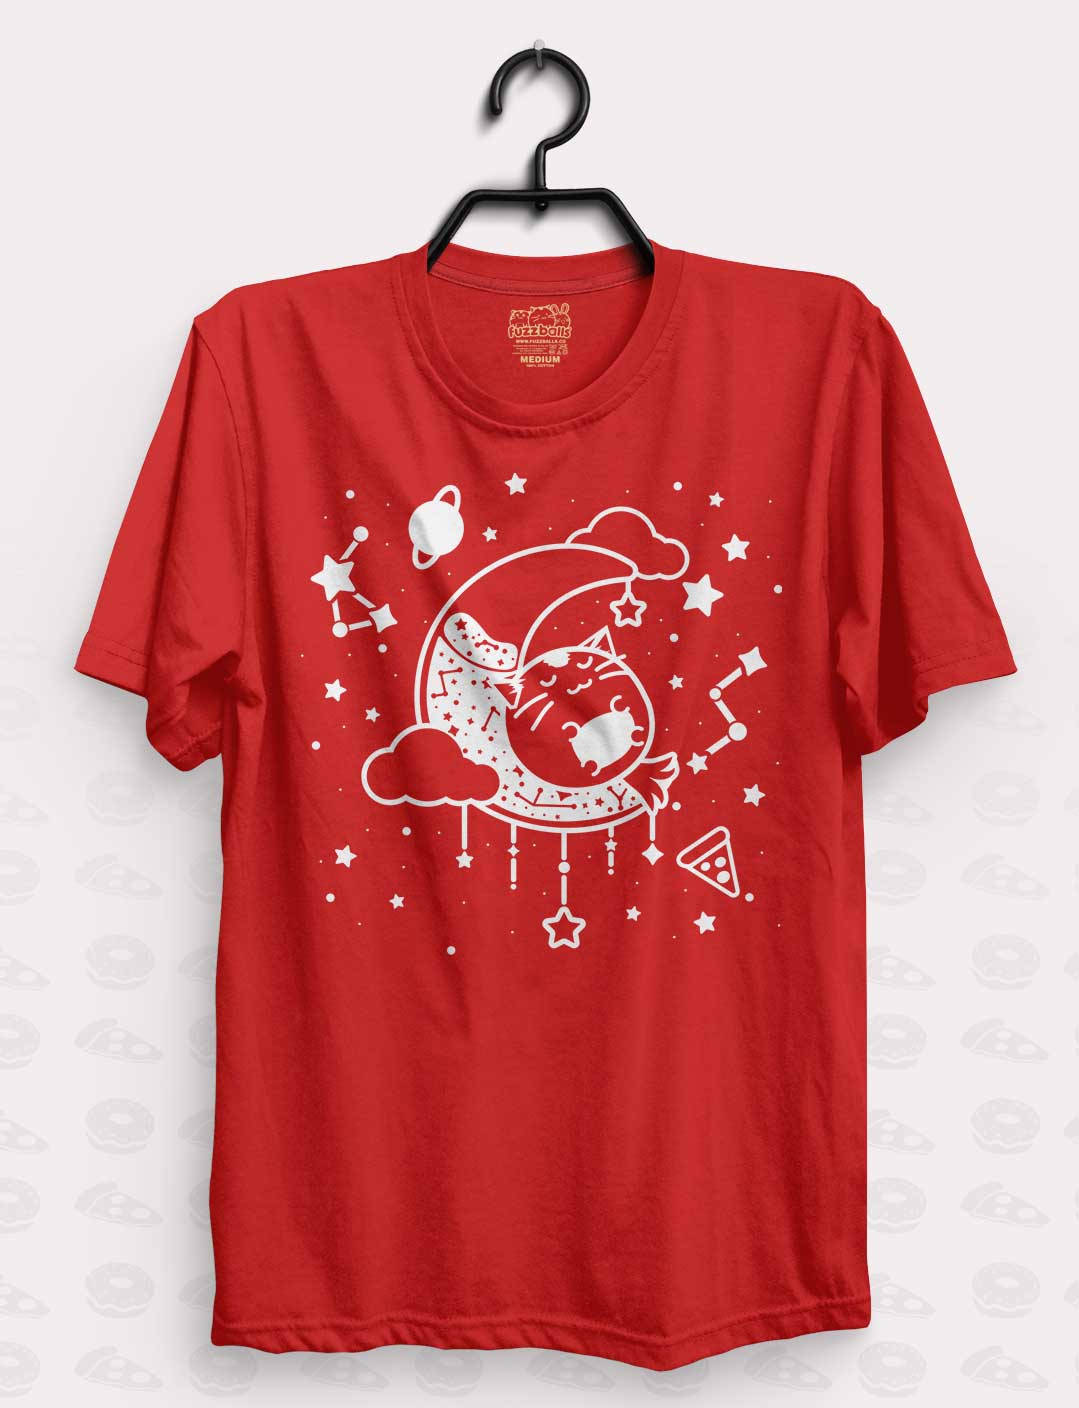 Cat in the moon Shirt